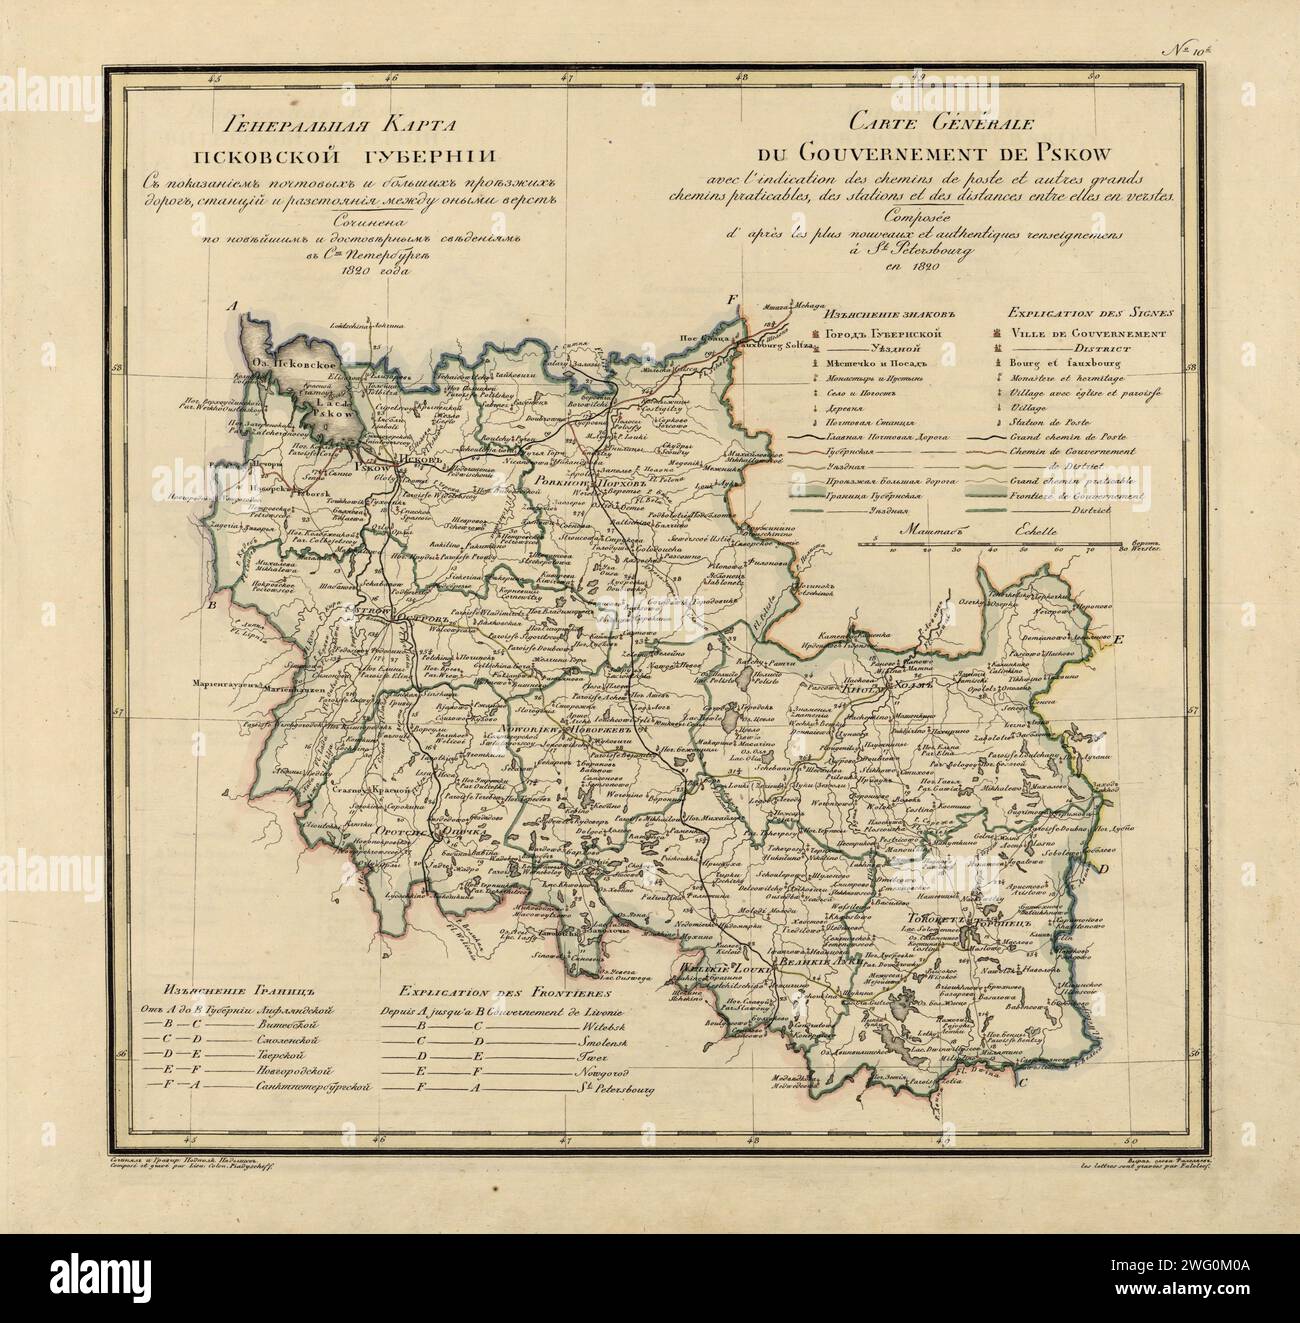 General Map of Pskov Province: Showing Postal and Major Roads, Stations and the Distance in Versts between Them, 1820. This 1820 map of Pskov Provinceis from a larger work,Geograficheskii atlas Rossiiskoi imperii, tsarstva Pol'skogo i velikogo kniazhestva Finliandskogo(Geographical atlas of the Russian Empire, the Kingdom of Poland, and the Grand Duchy of Finland), containing 60 maps of the Russian Empire. Compiled and engraved by Colonel V.P. Piadyshev, it reflects the detailed mapping carried out by Russian military cartographers in the first quarter of the 19th century. The map shows popula Stock Photo